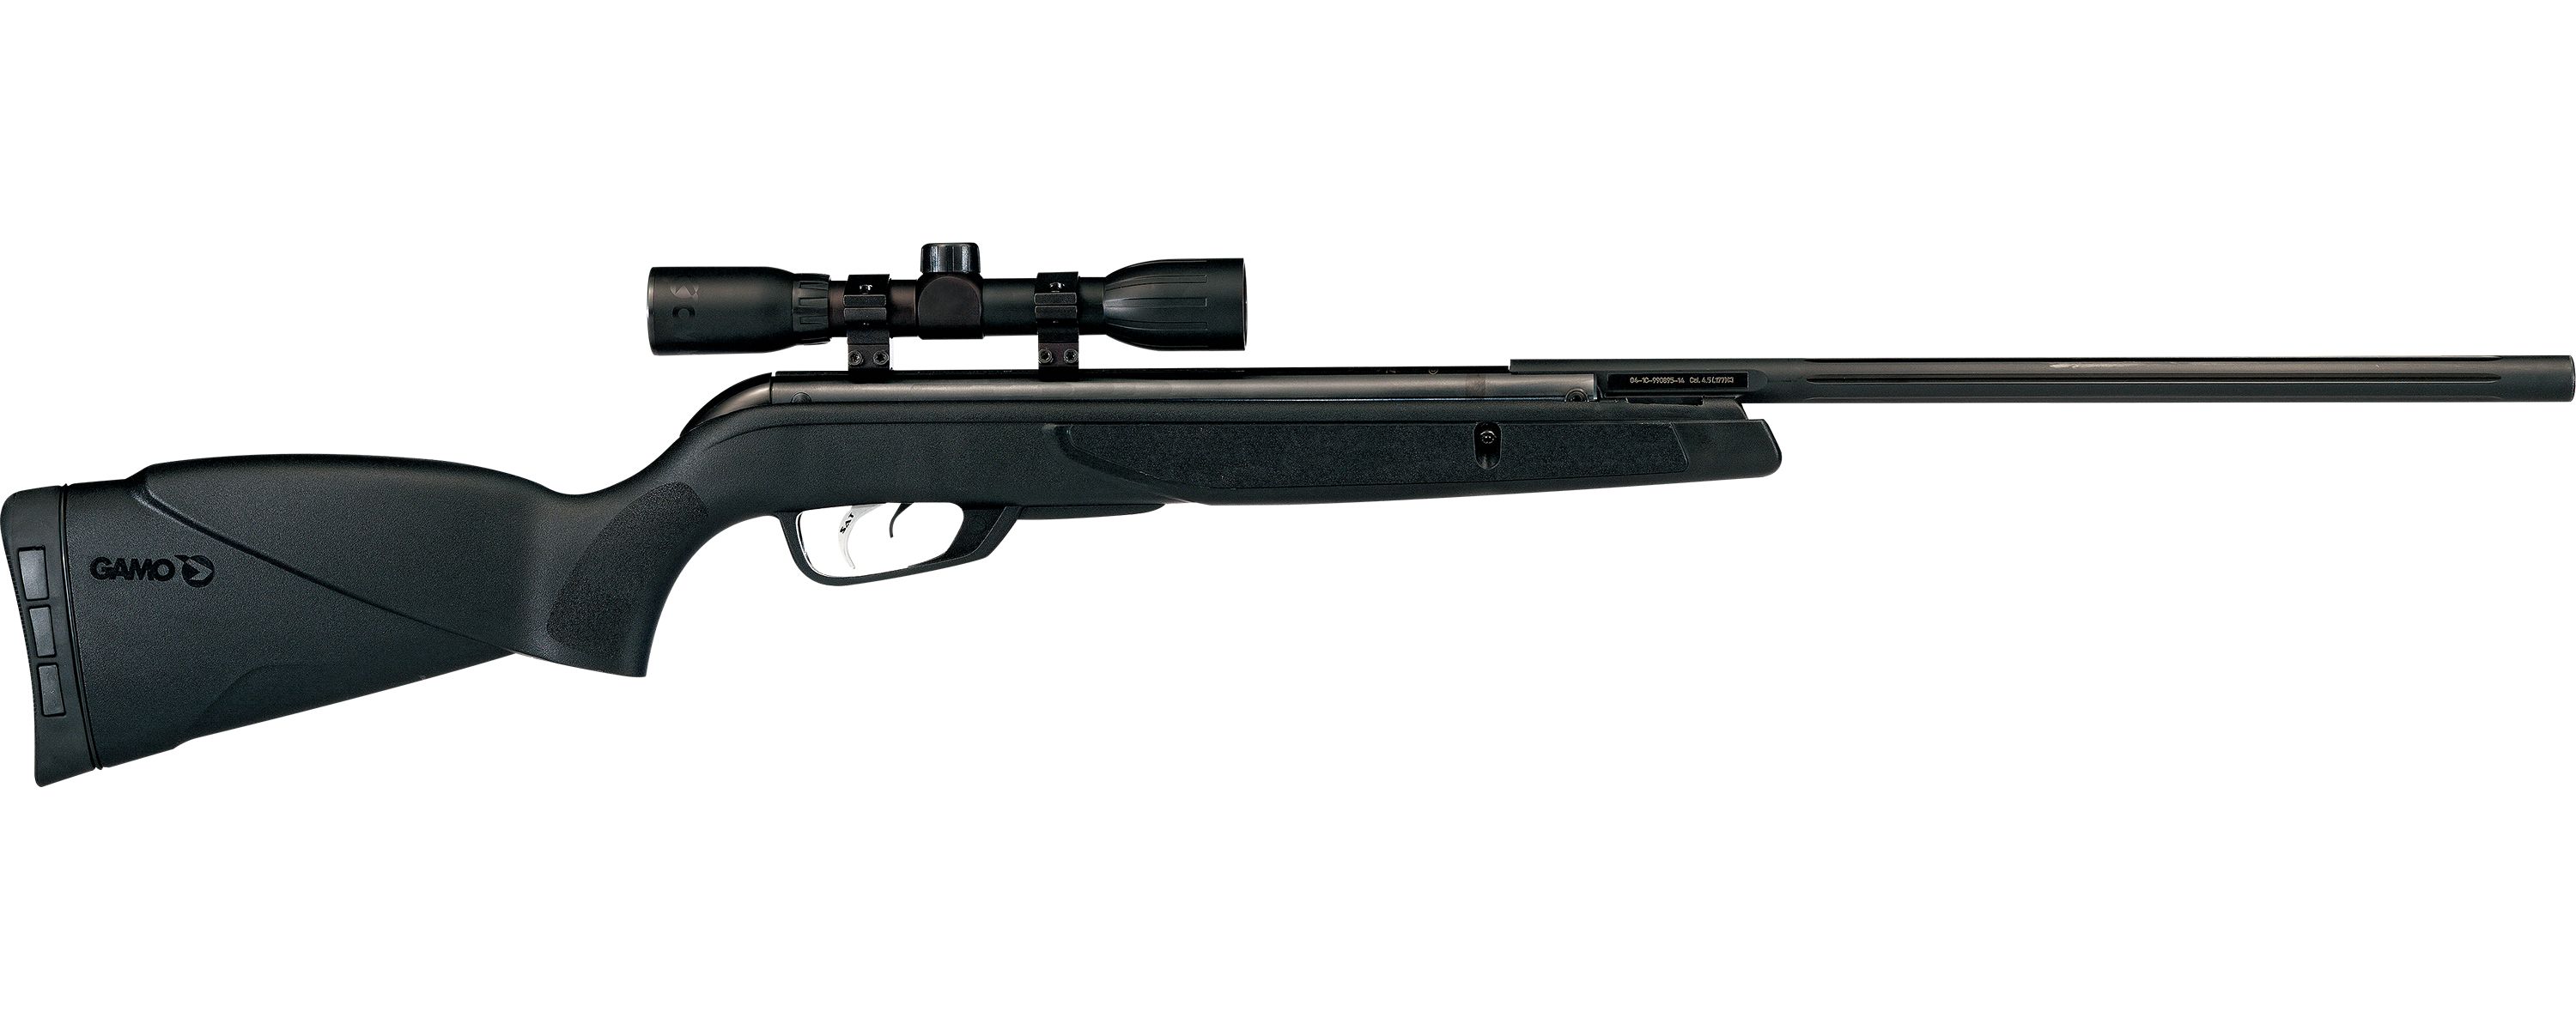 Gamo Big Cat Deluxe .177-Cal. Air Rifle - $99.88 (Free 2-Day Shipping over $50)